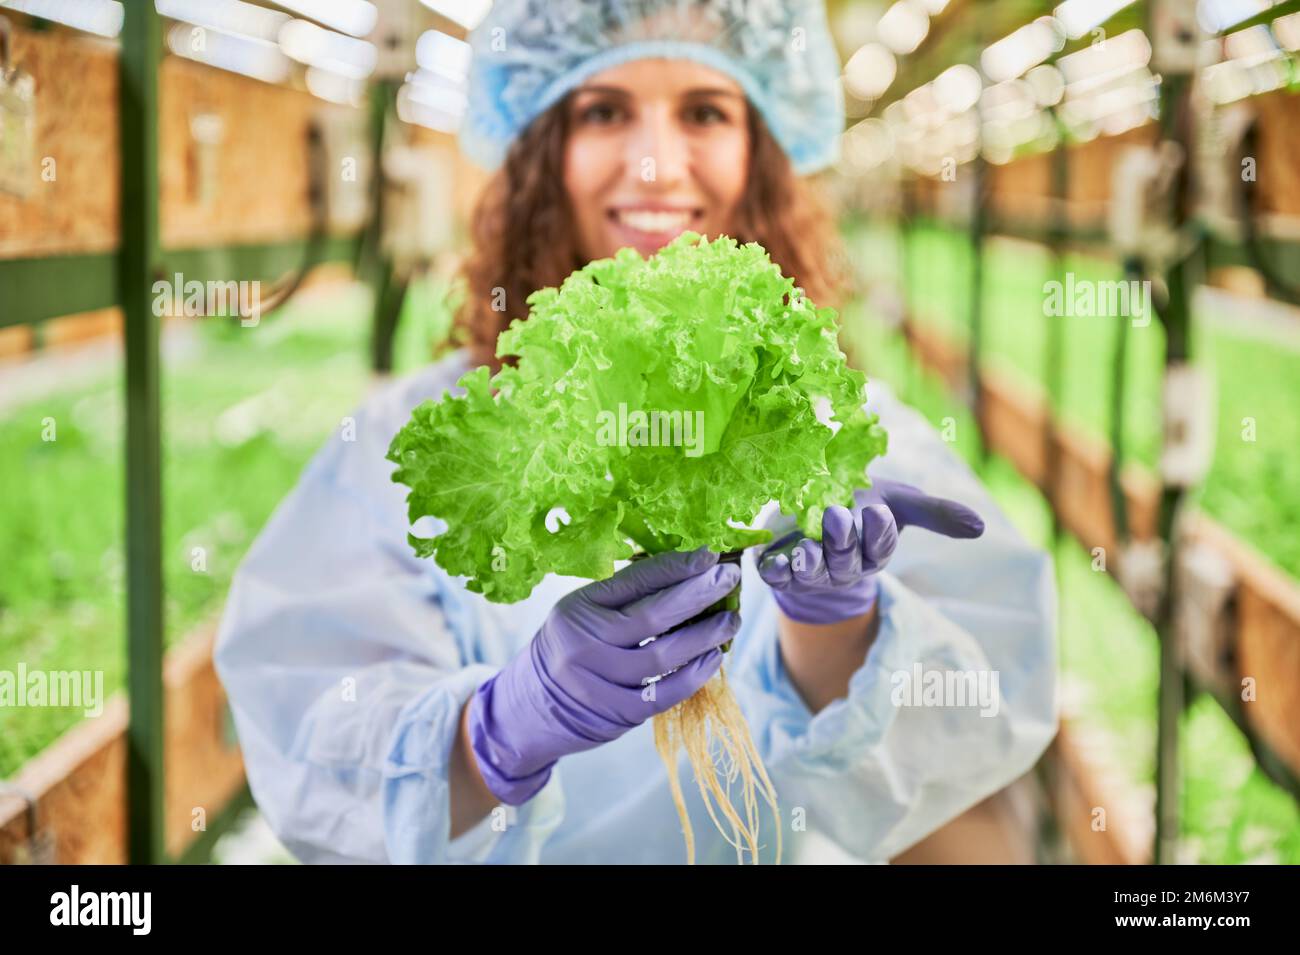 Cheerful young woman with green lettuce in hands standing in greenhouse. Close up of joyful female gardener in garden gloves holding green leafy plant and smiling on blurred background. Stock Photo